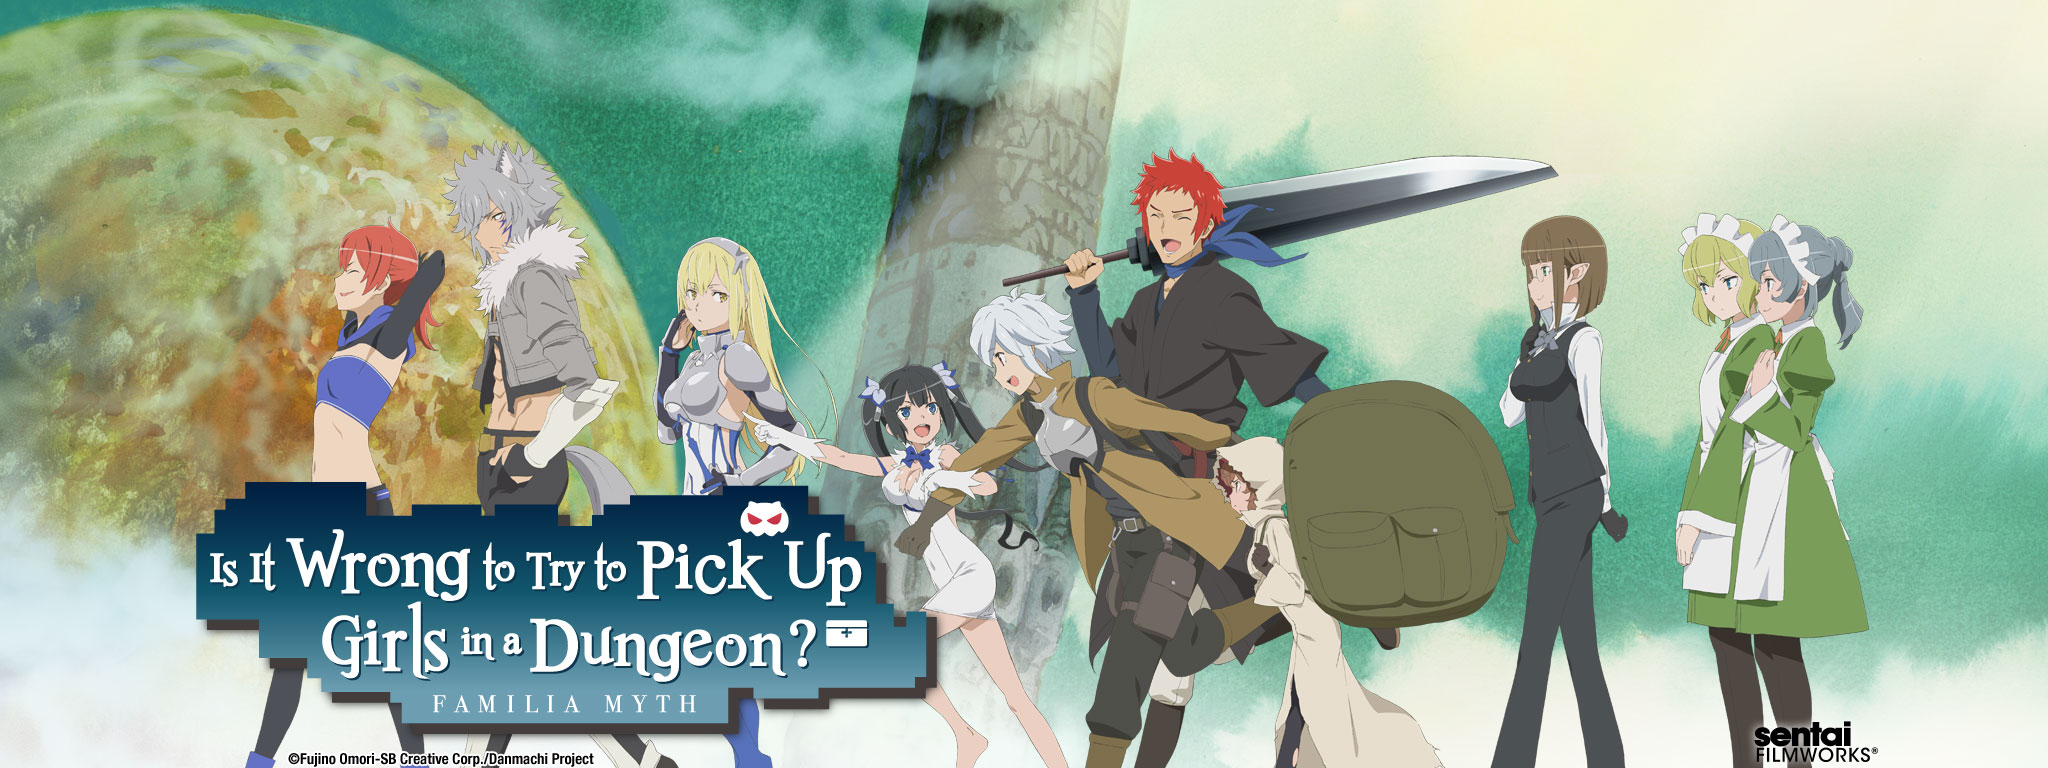 Title Art for Is It Wrong to Try to Pick Up Girls in a Dungeon?